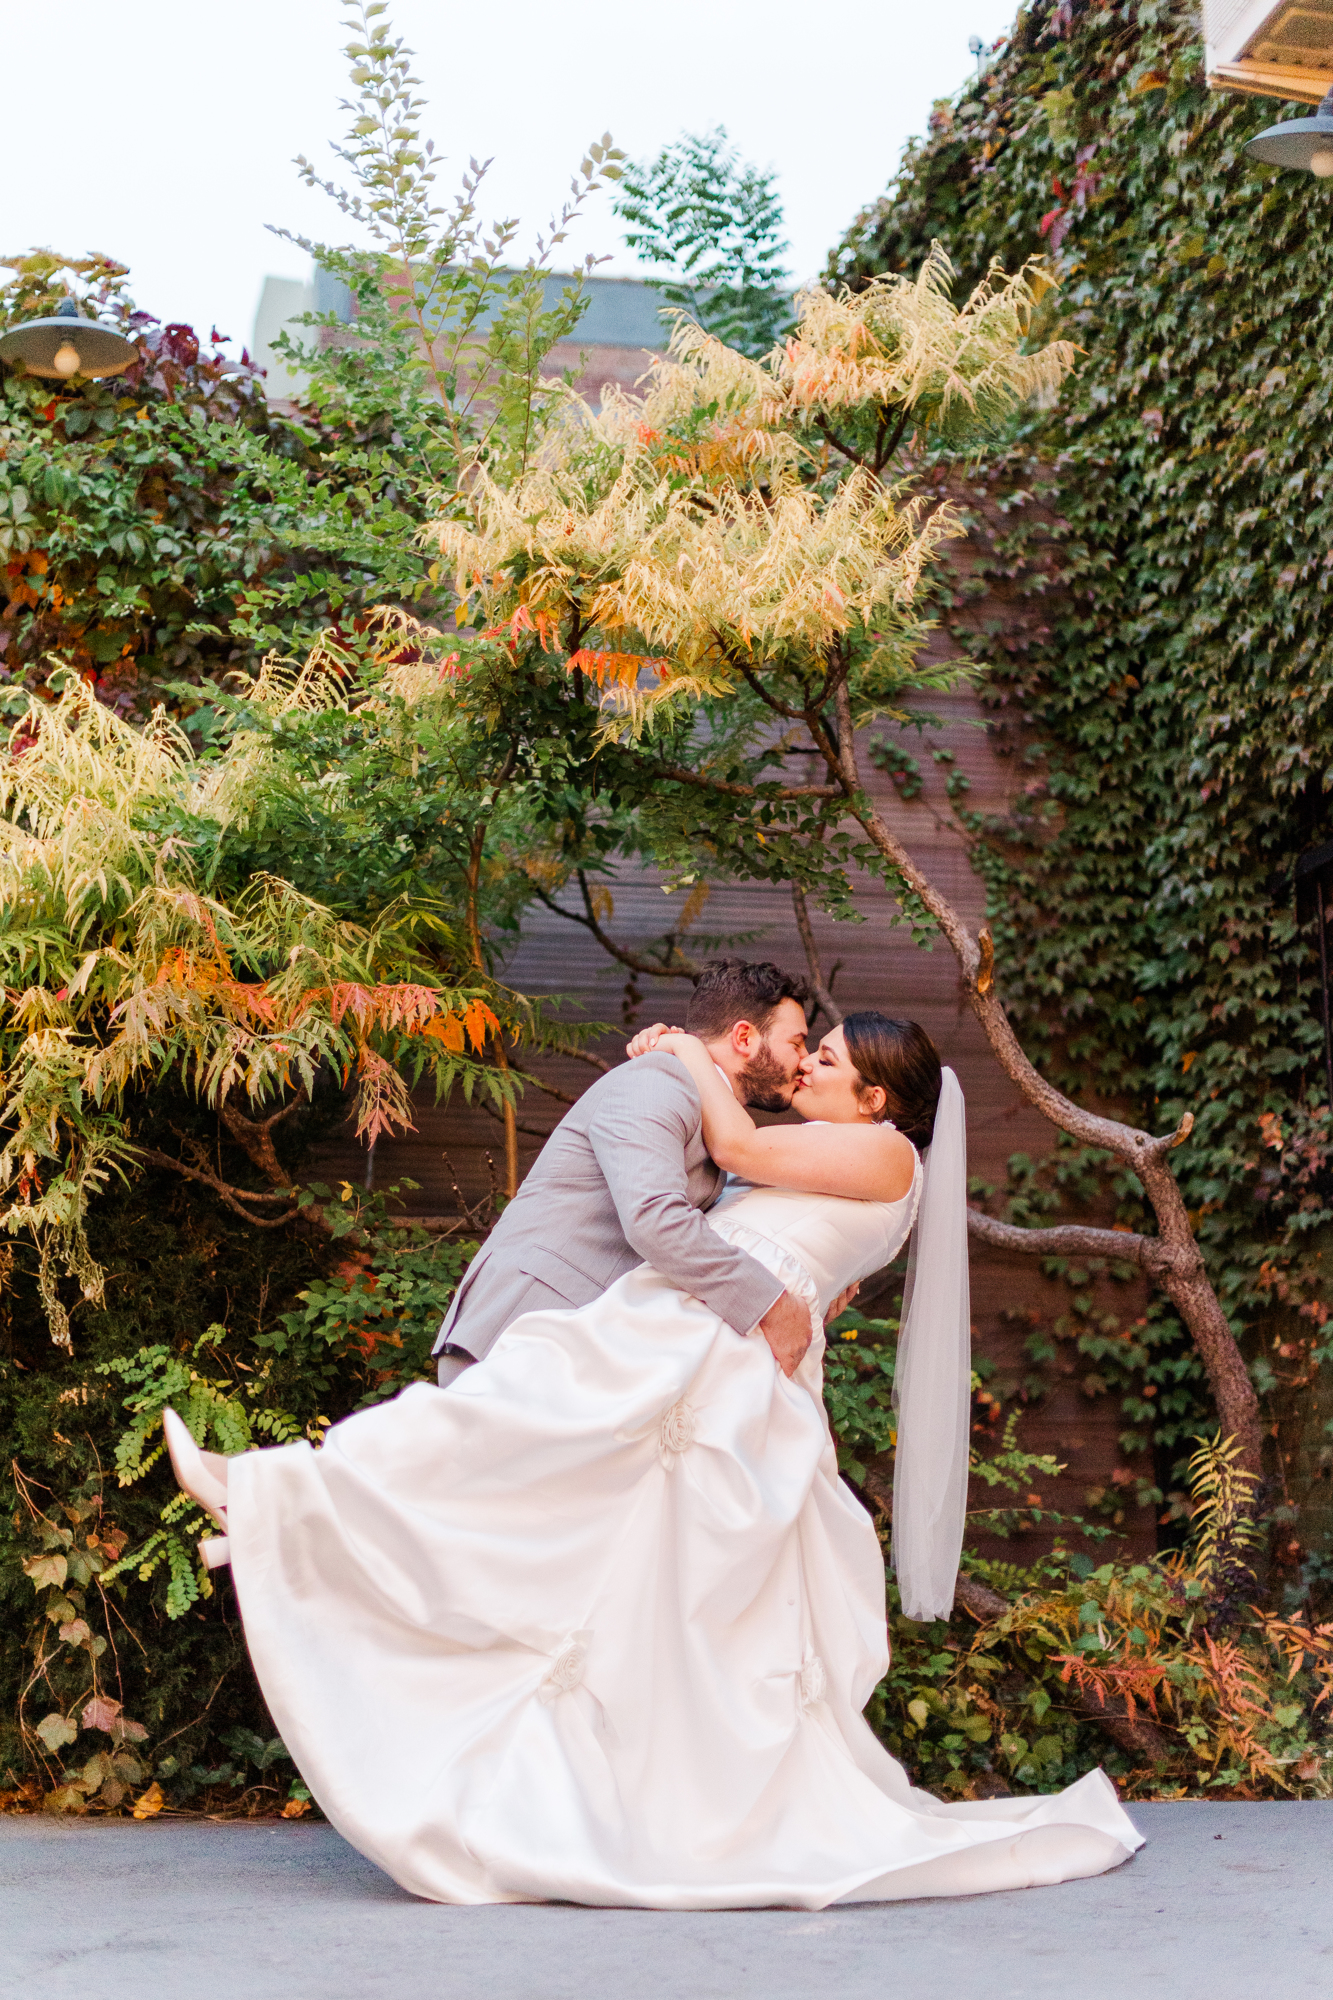 Touching Rainy New York Wedding Photos at The Green Building in Autumn